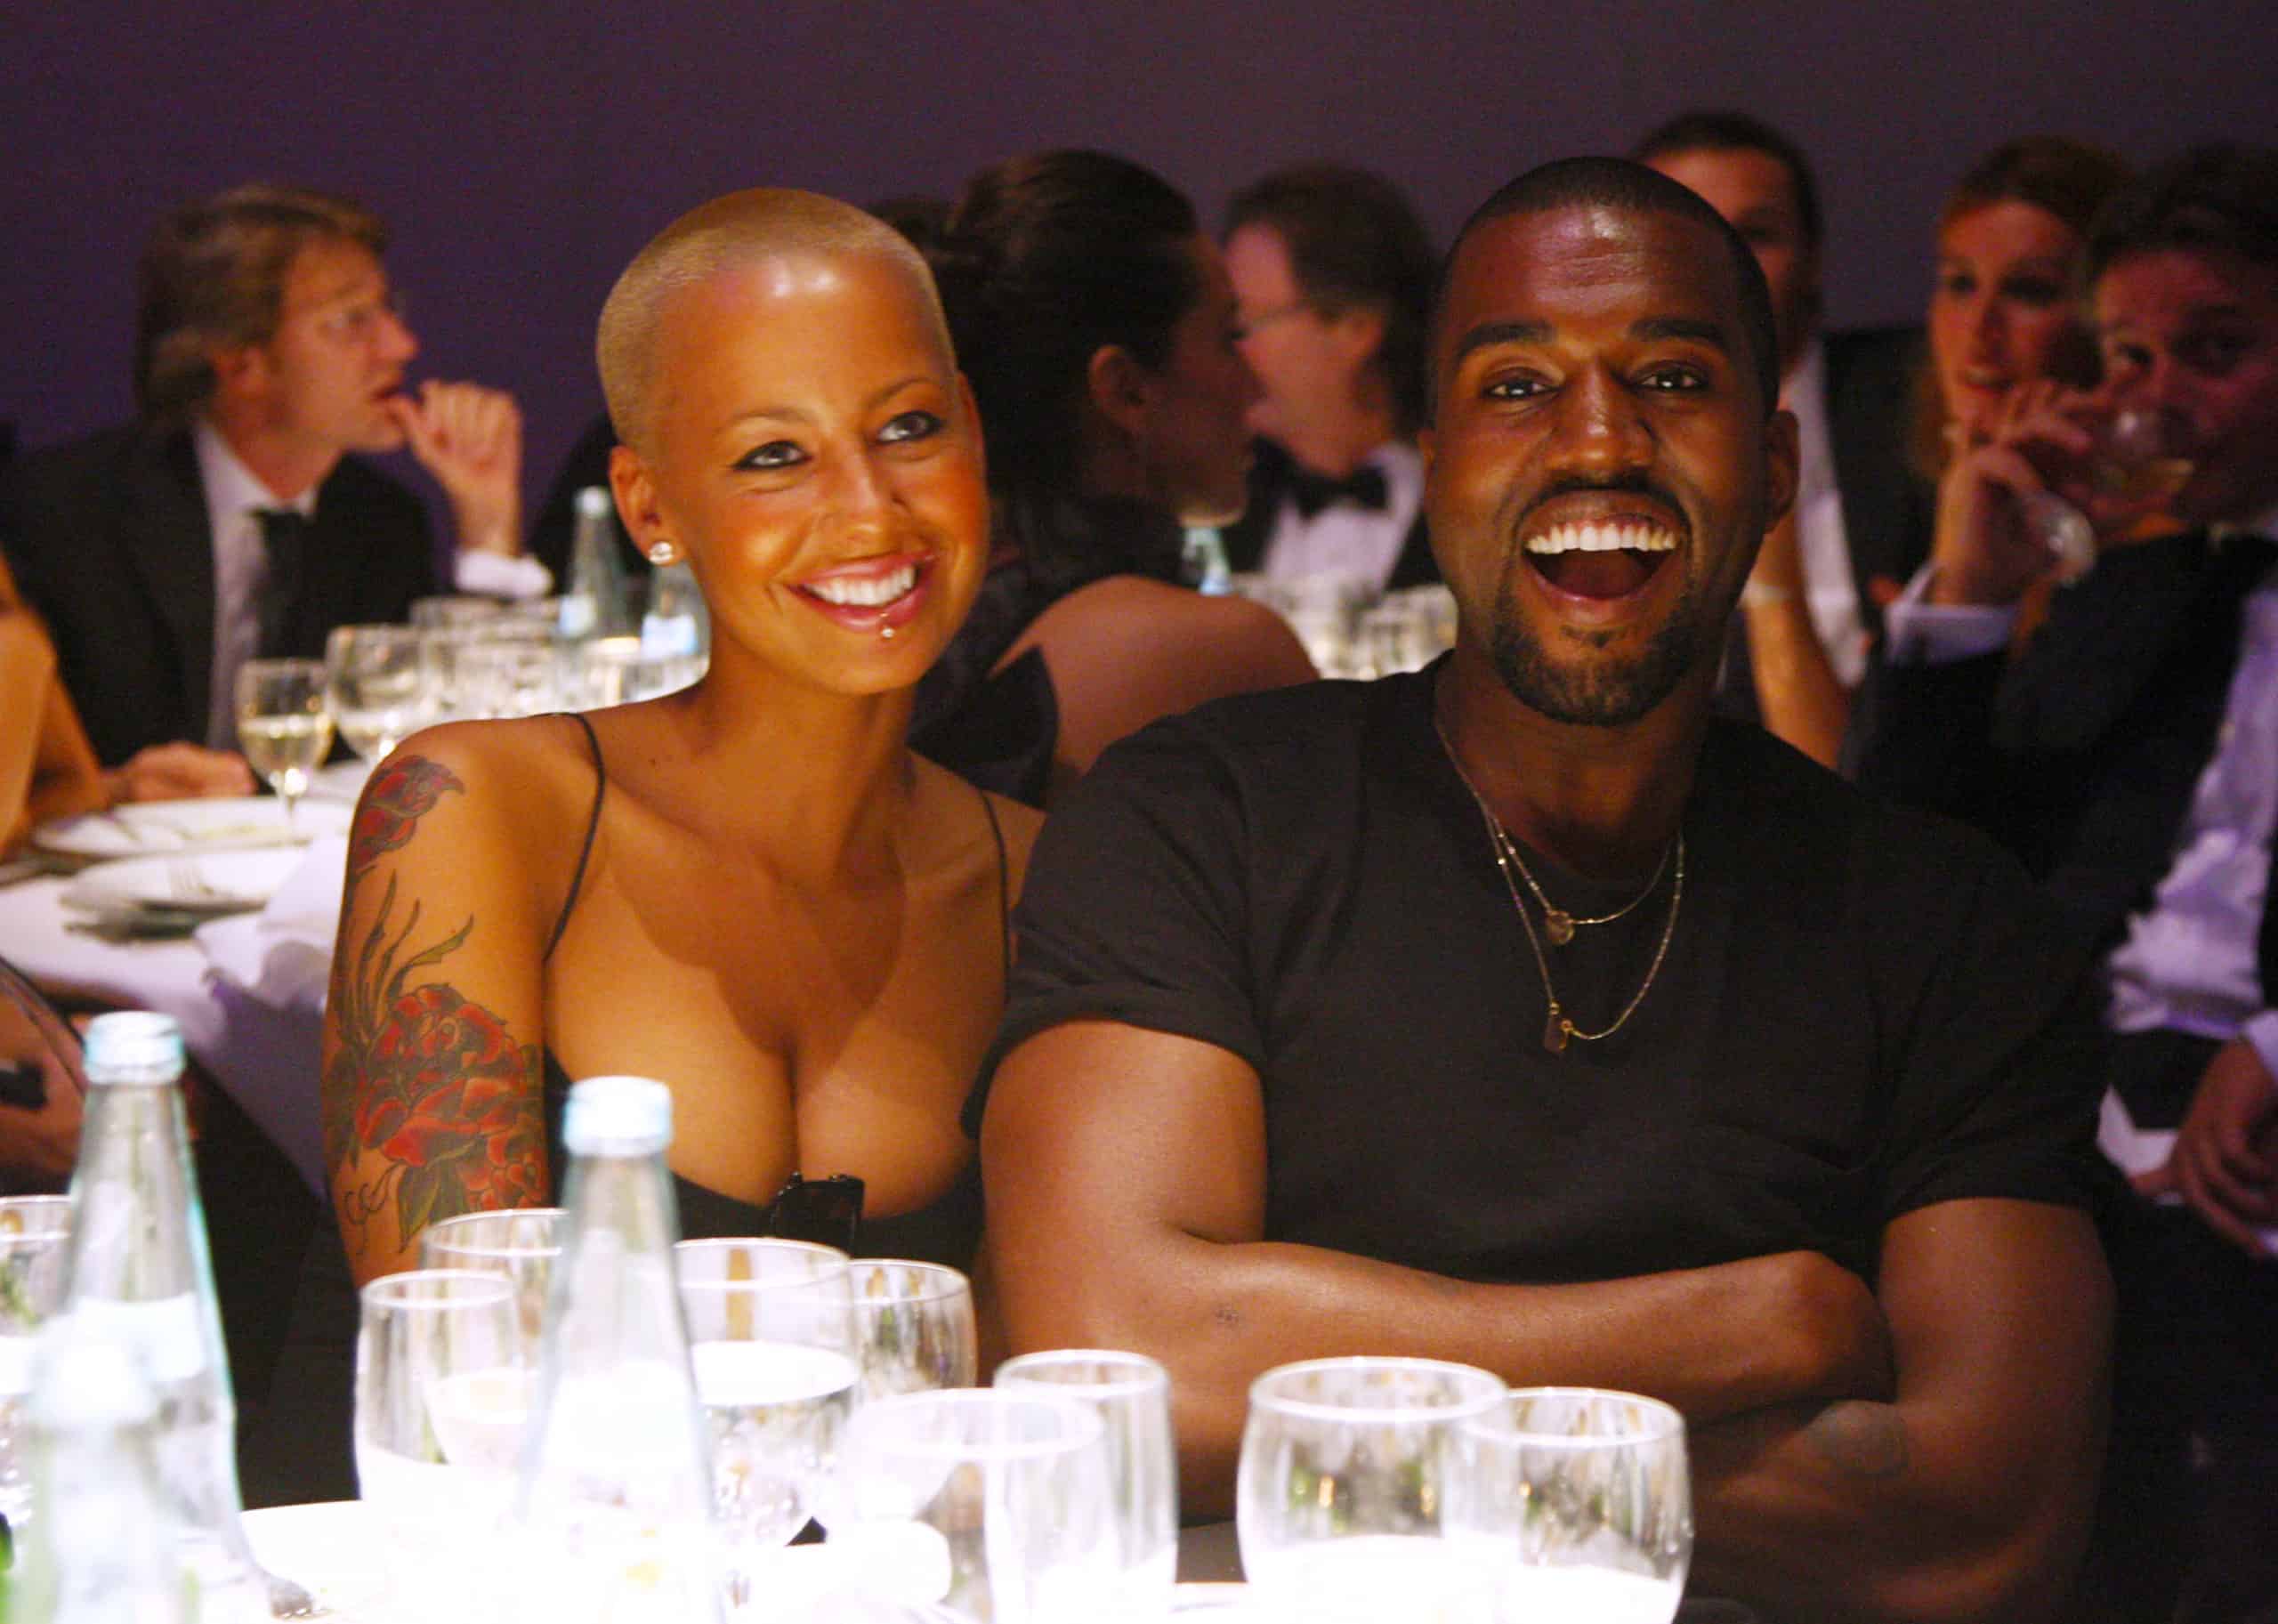 Amber Rose Wants Her Ex Kanye West To Keep Her Name Out Of His Mouth, Says He’s Bullied Her For 10 Years